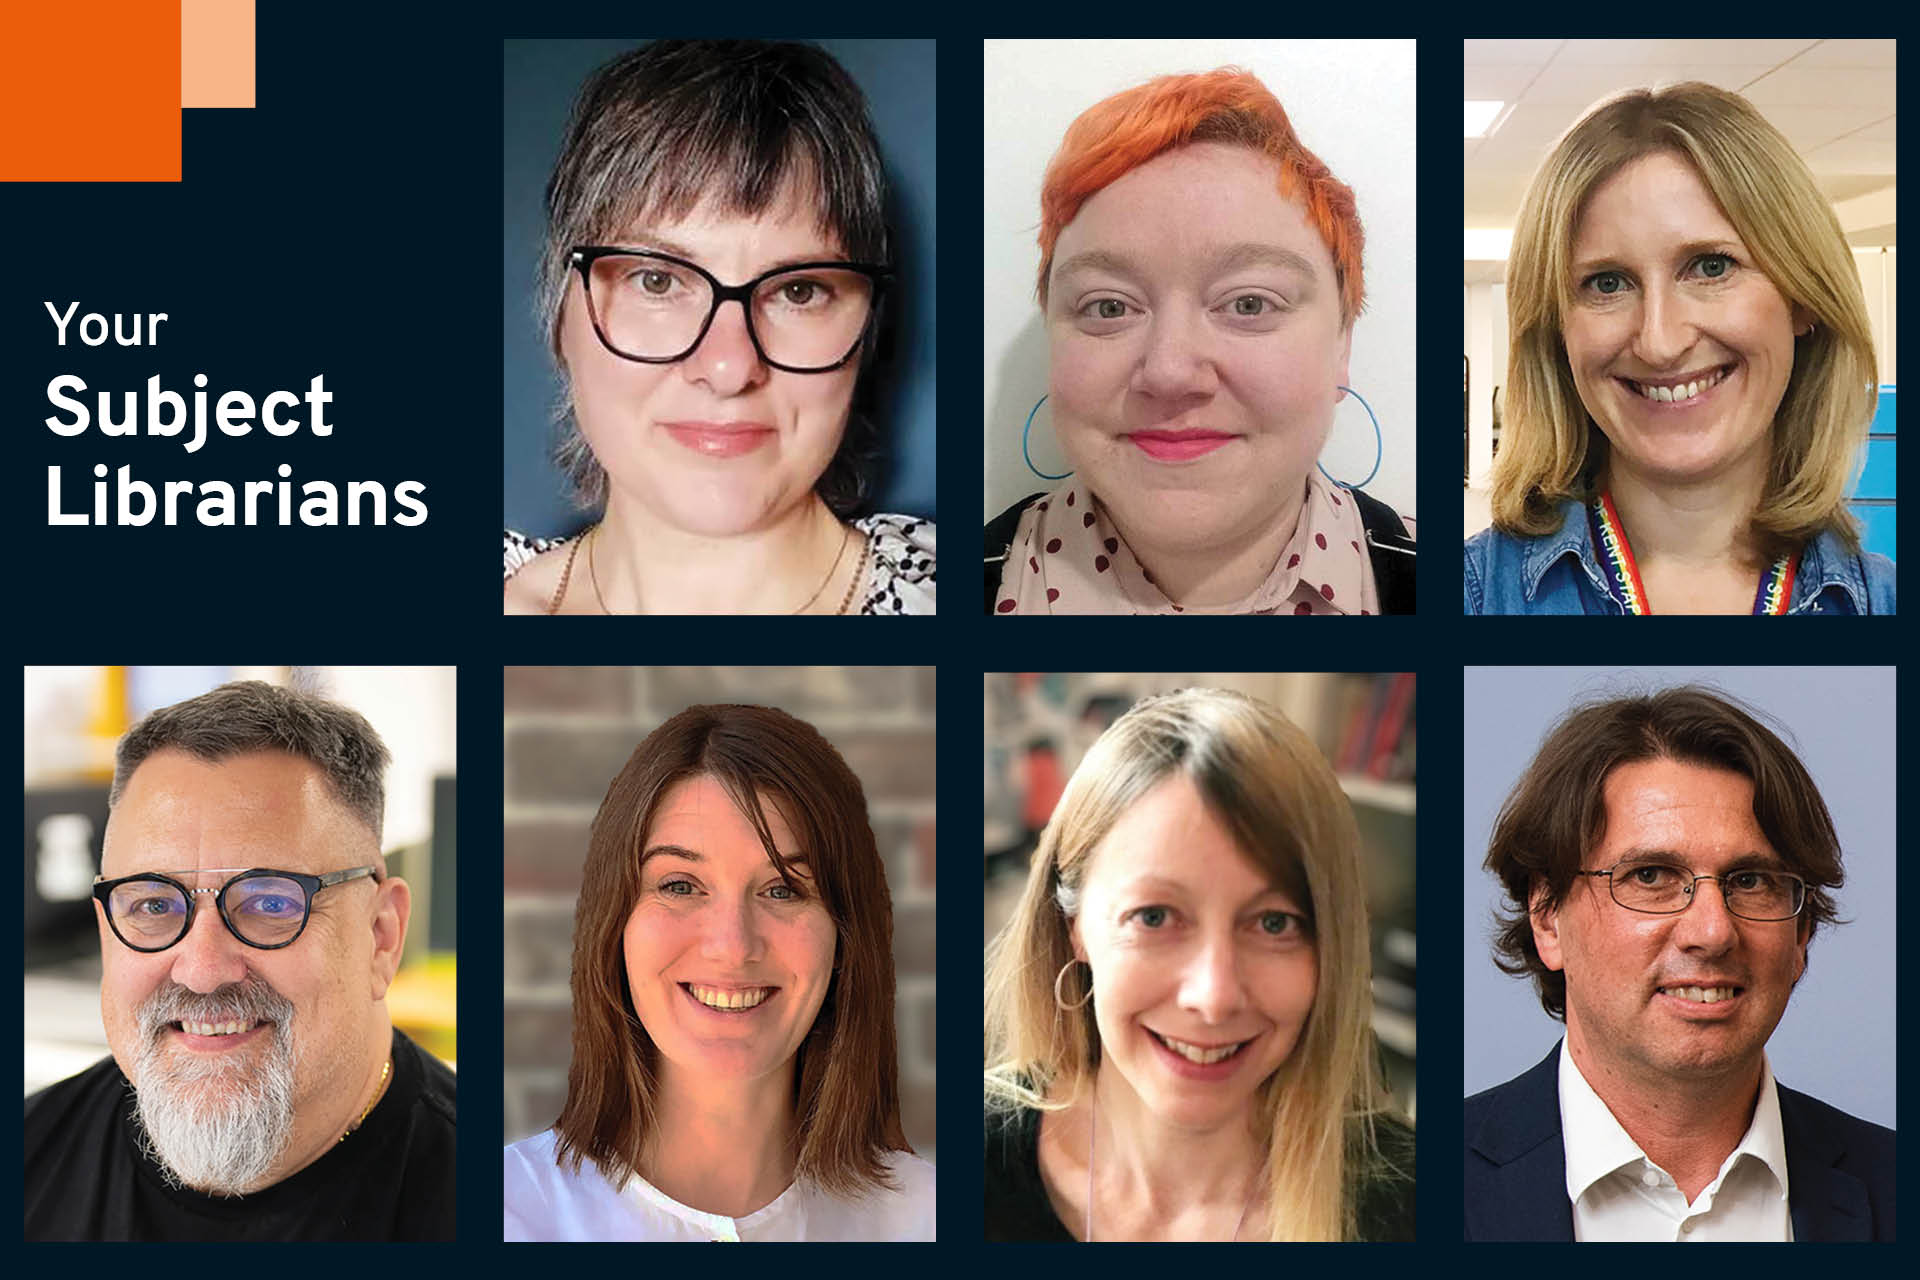 Your subject librarians picture gallery: top row left to right: Sarah Field, Holly Calaghan, Katie Edwards; bottom row left to right: Andy Prue, Emma Furderer, Emma Mires-Richards, Manfred Gschwandtner